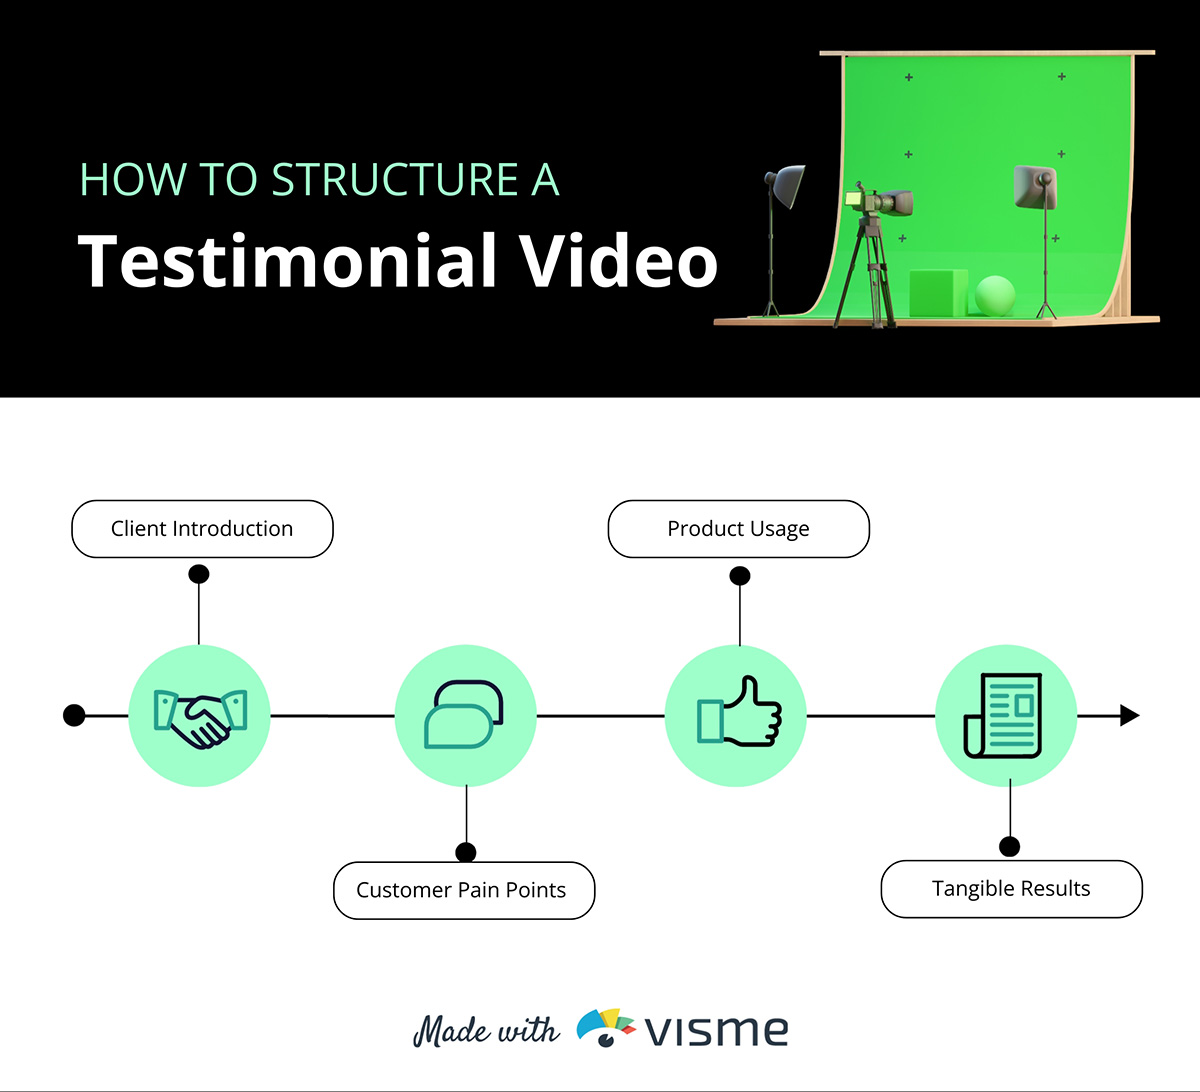 An infographic shows how to structure a testimonial video.